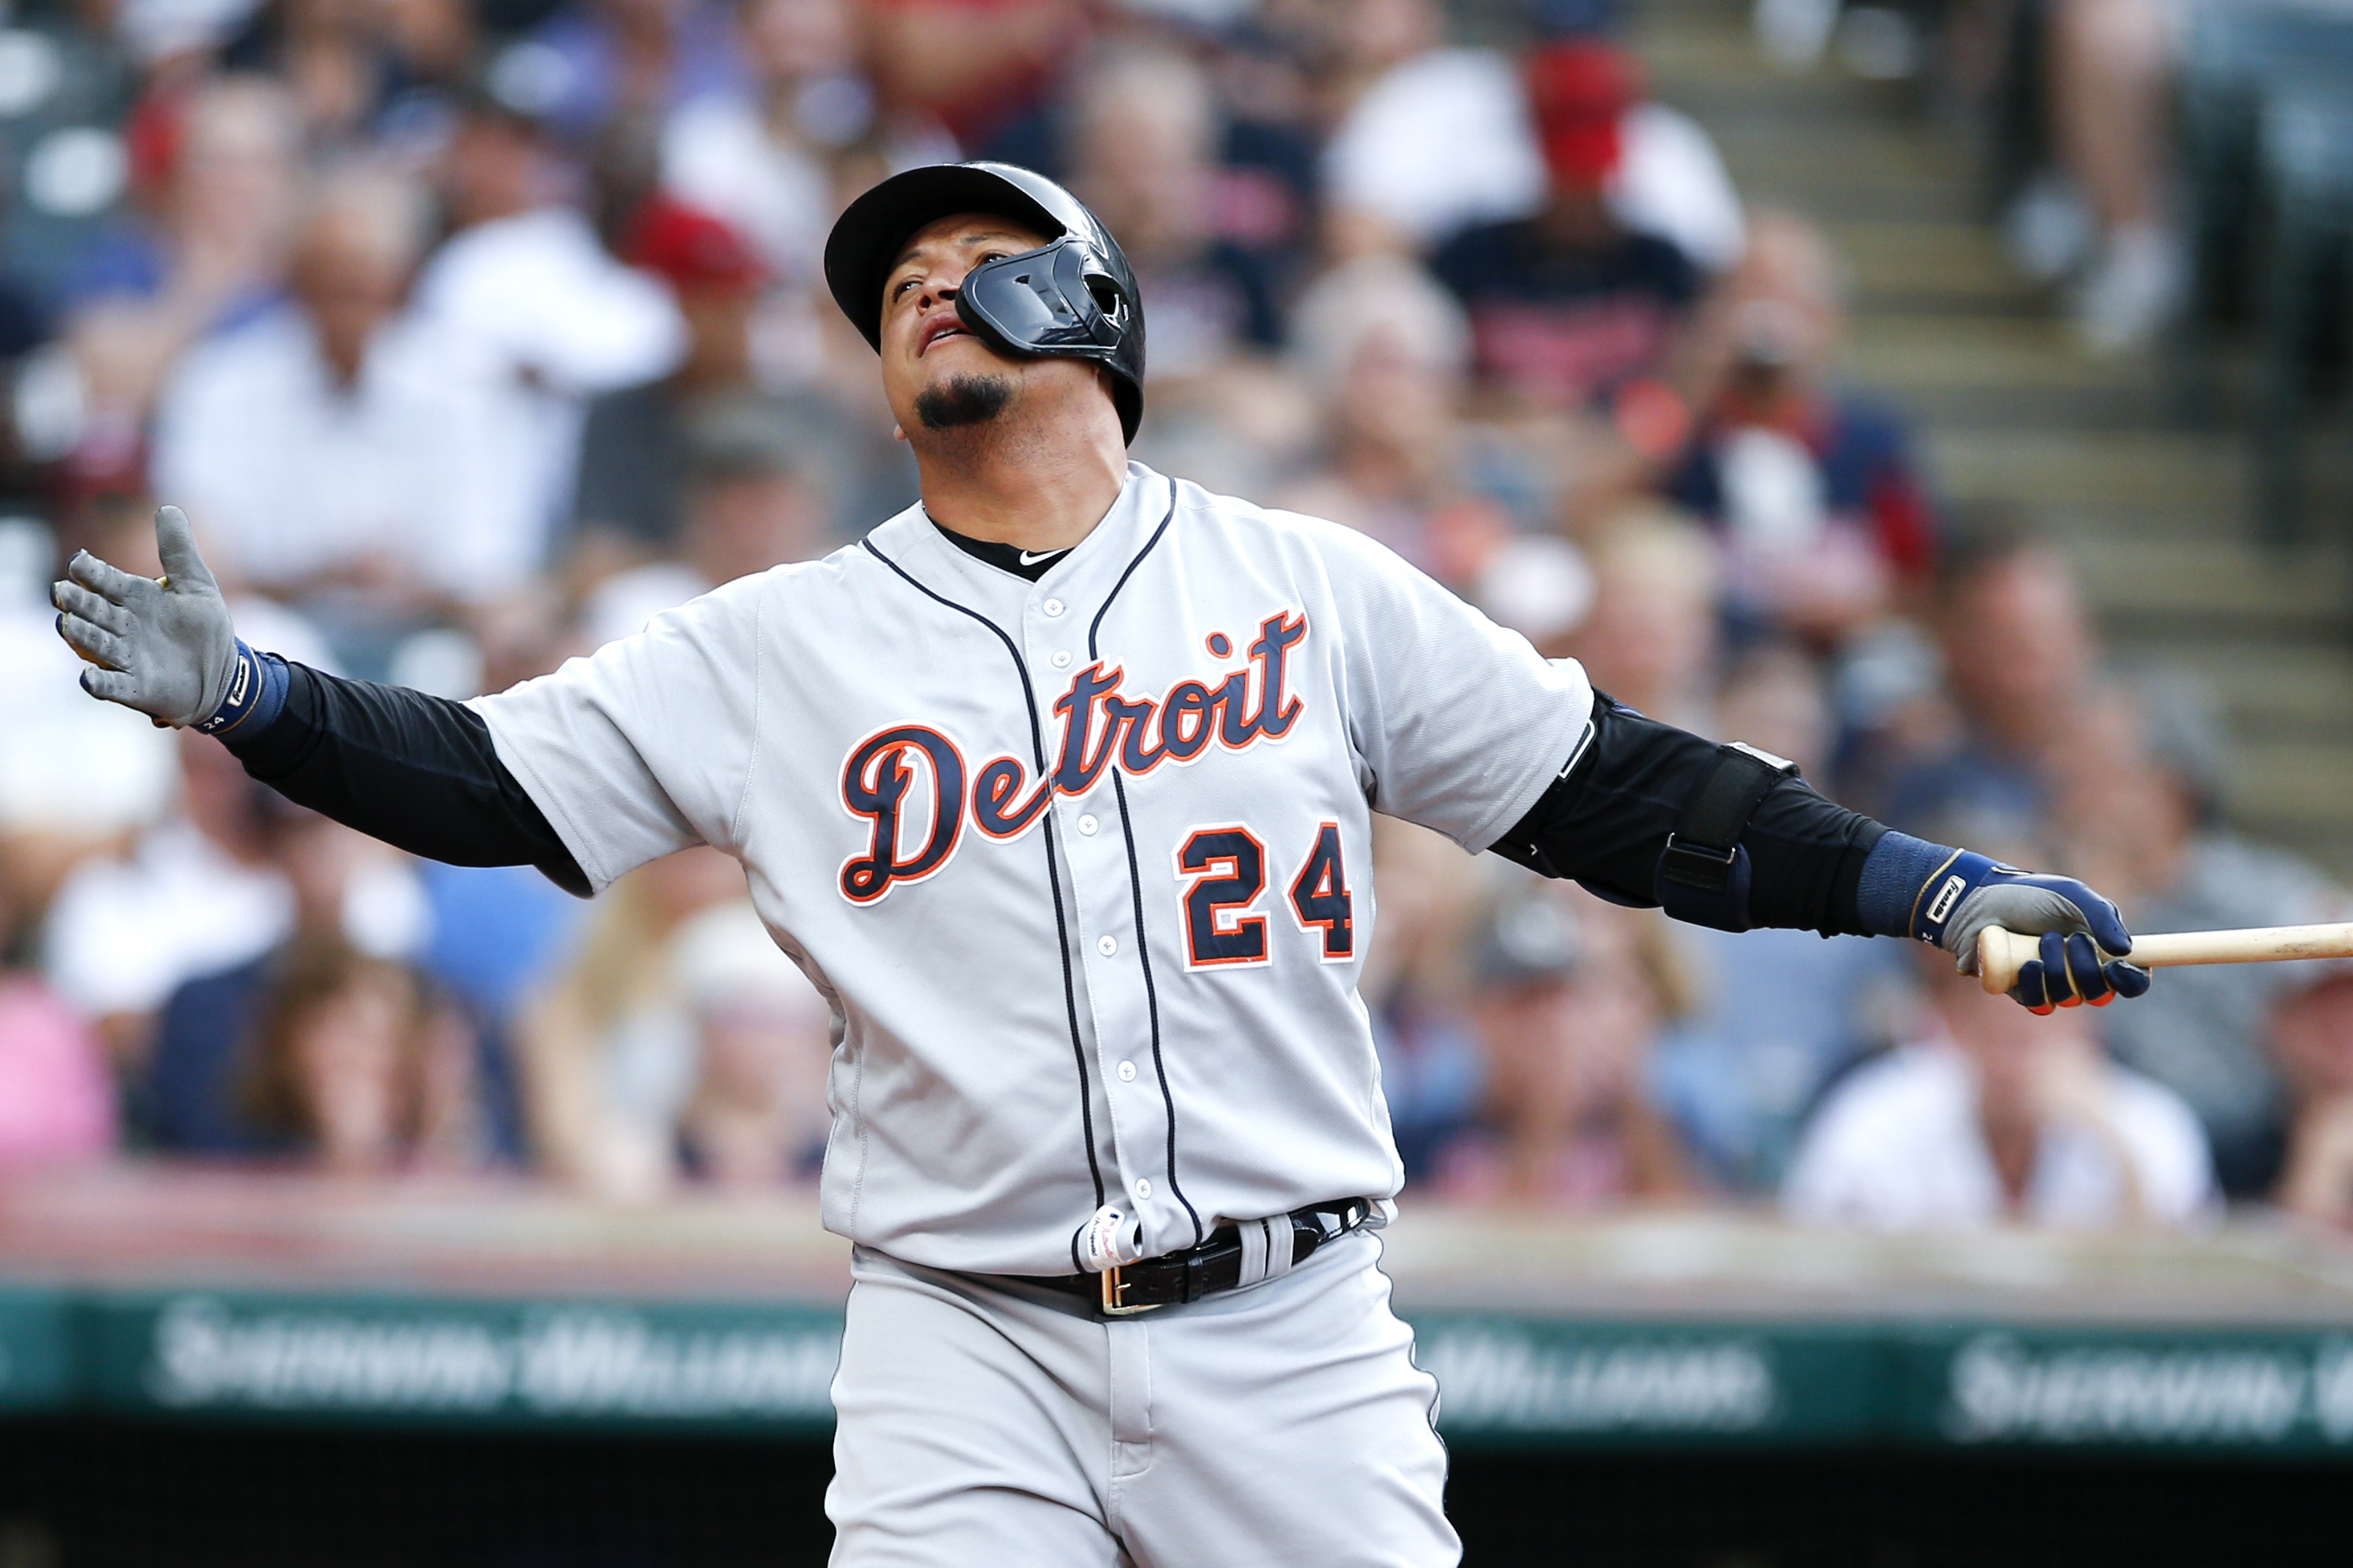 J.D. Martinez excited after Miguel Cabrera's 3000th hit